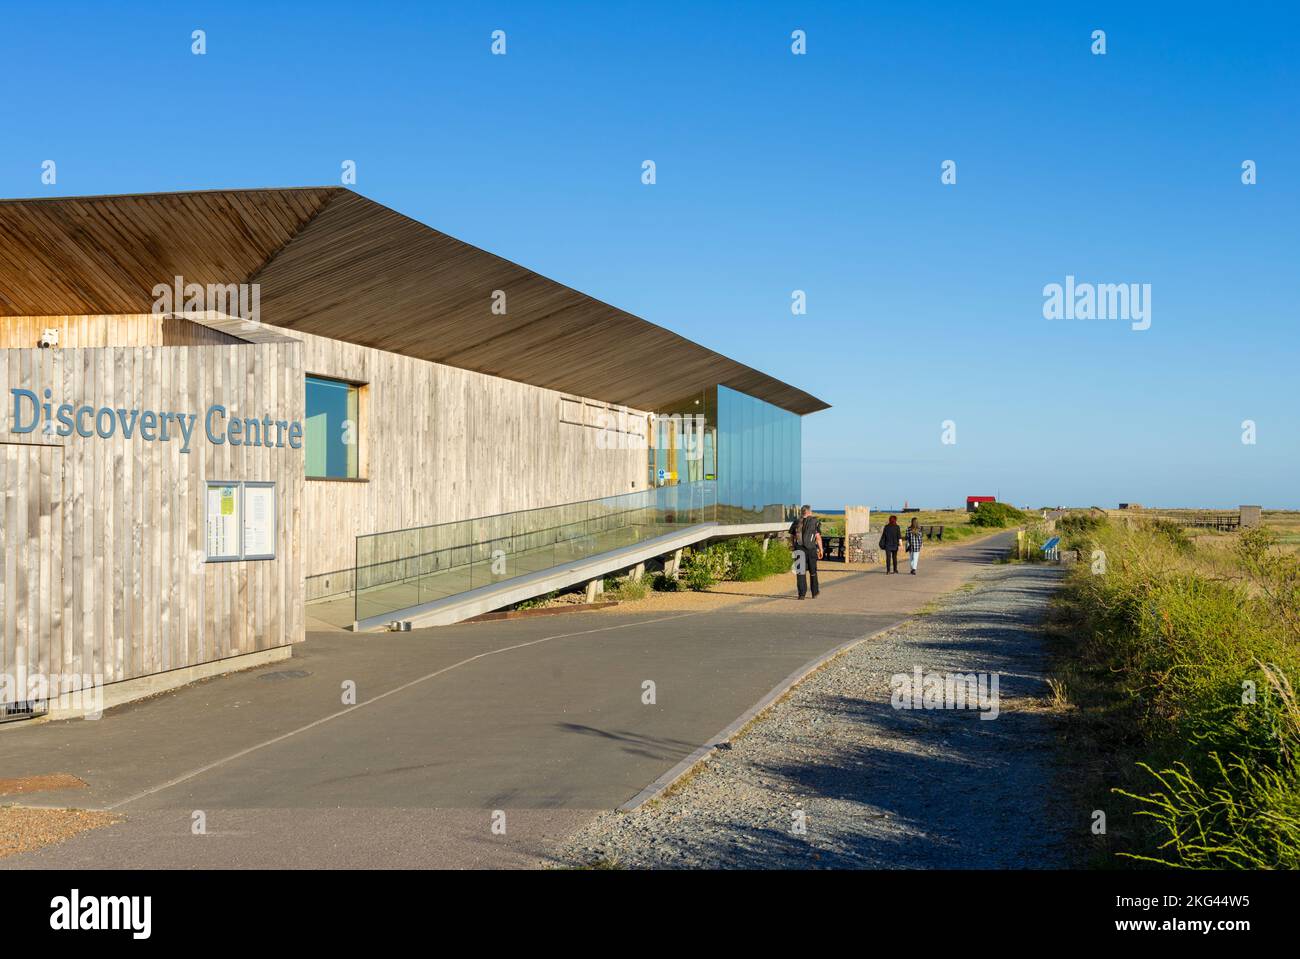 Rye Harbour nature Reserve Rye Harbour Discovery Centre Rye Harbour Rye Sussex Angleterre GB Europe Banque D'Images